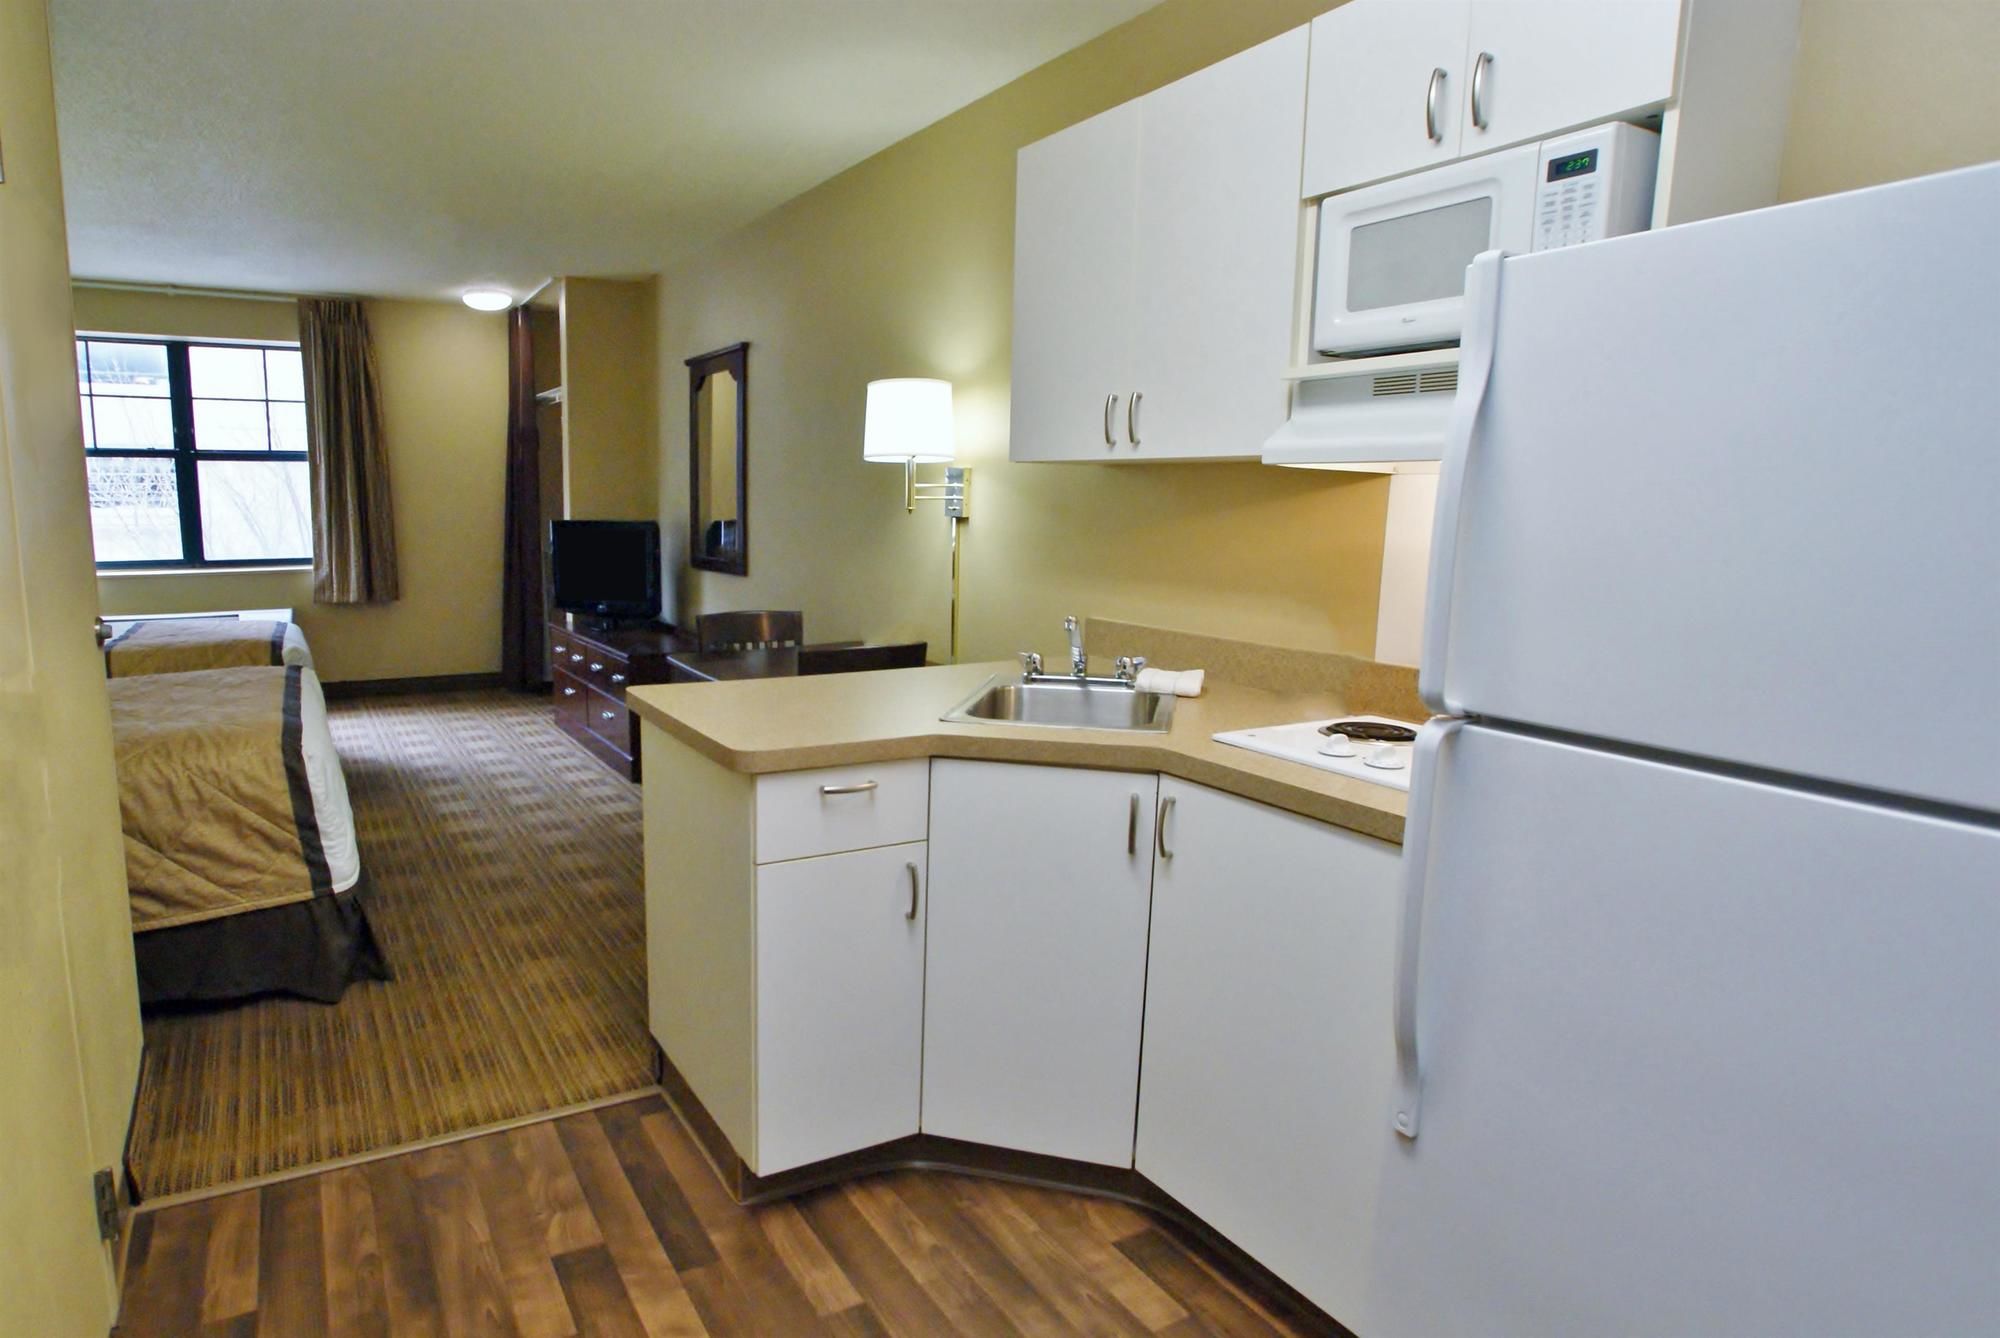 Extended Stay America Orlando Lake Mary 1036 Greenwood Blvd.